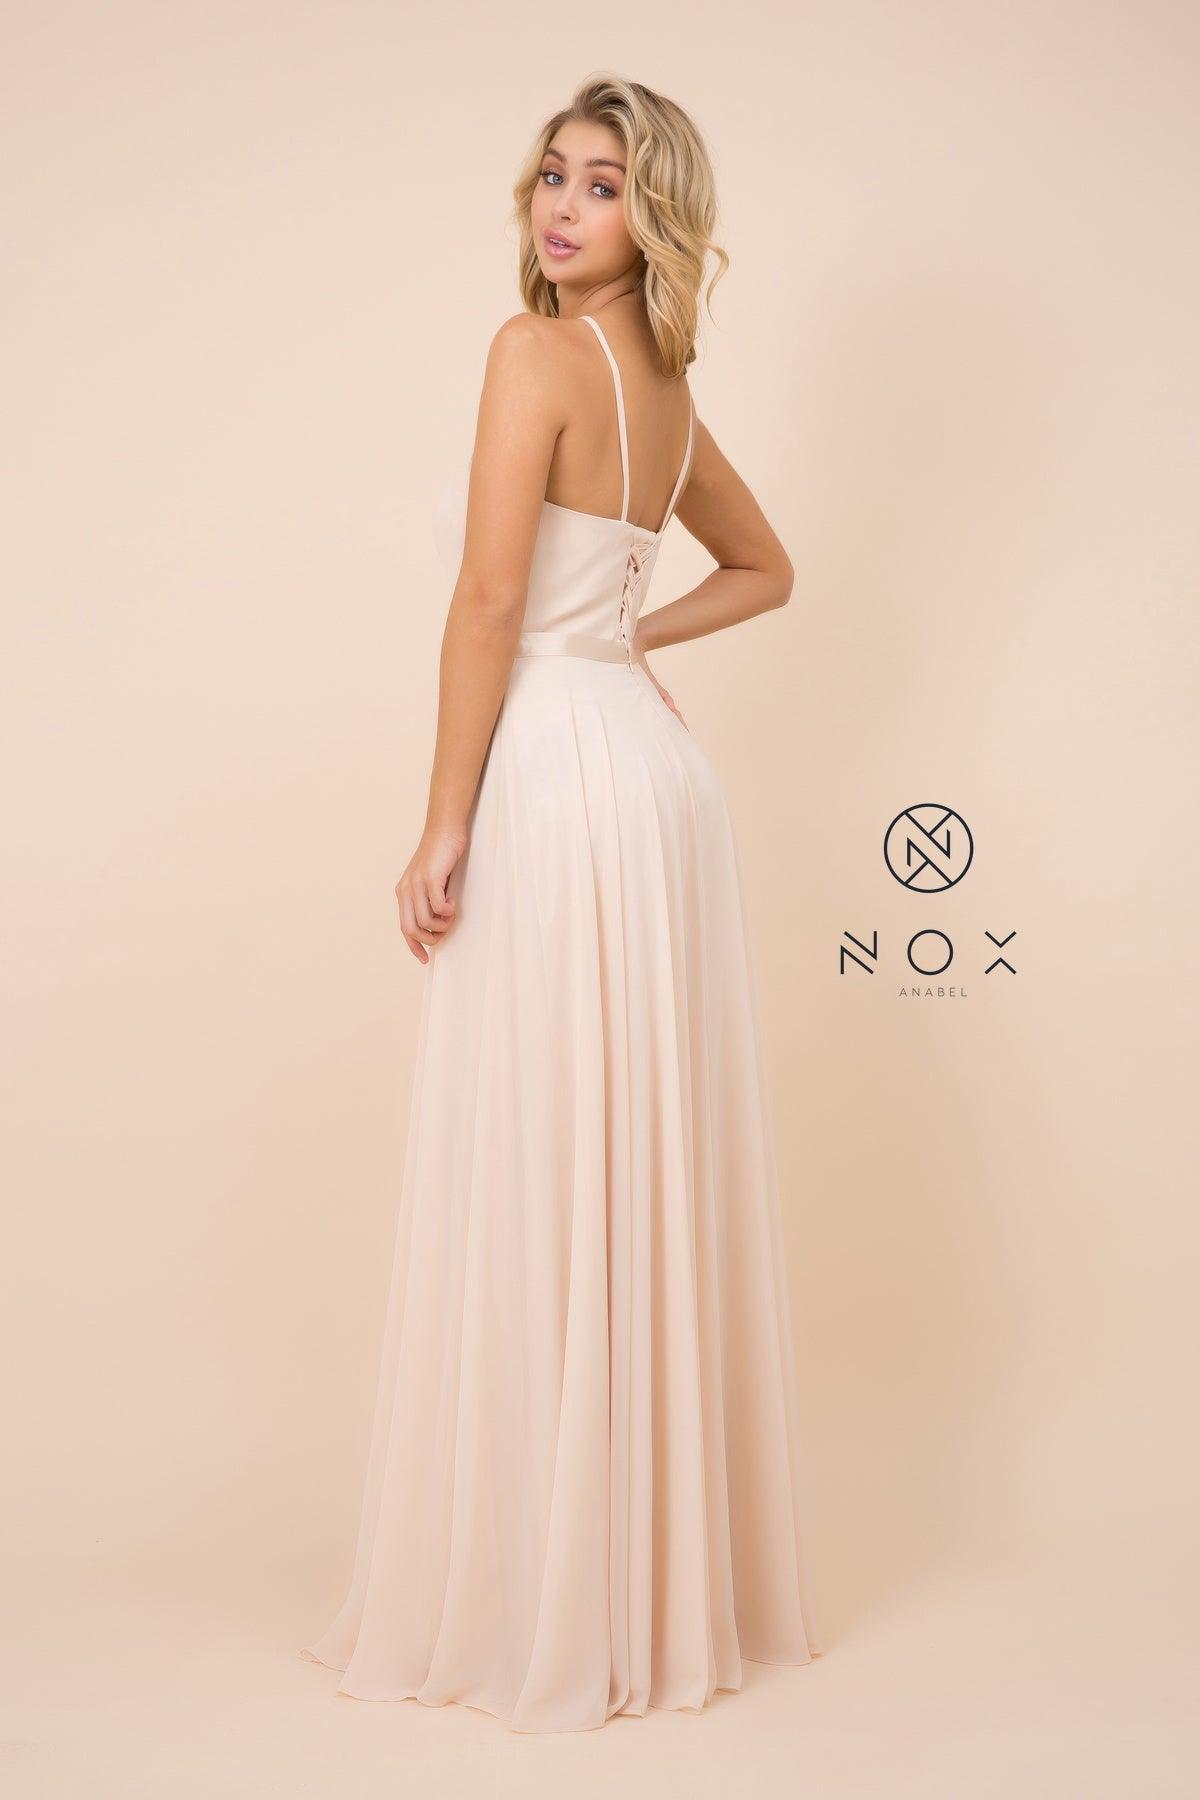 Long Formal Bridesmaid Prom Dress Champagne